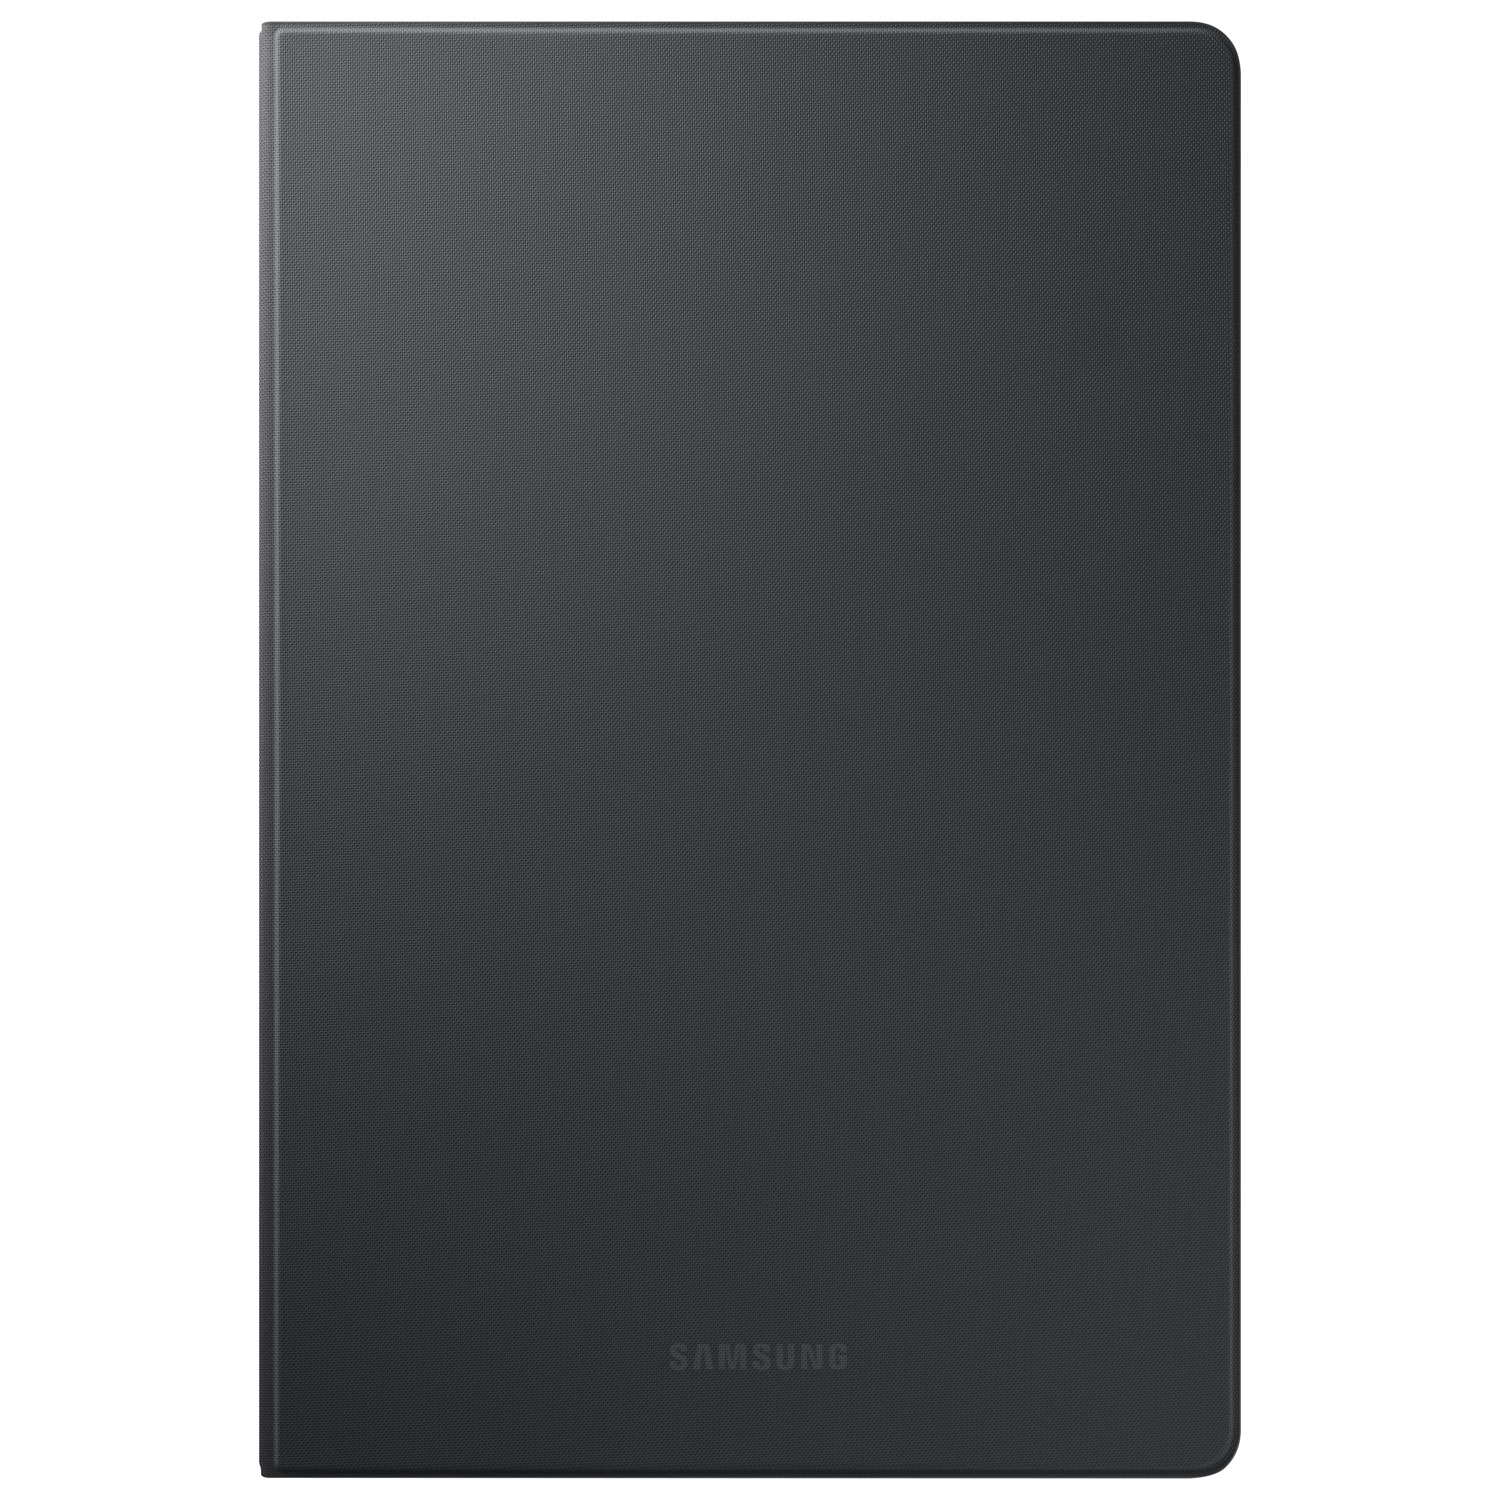 Samsung Book Cover for Galaxy Tab S6 Lite - Grey